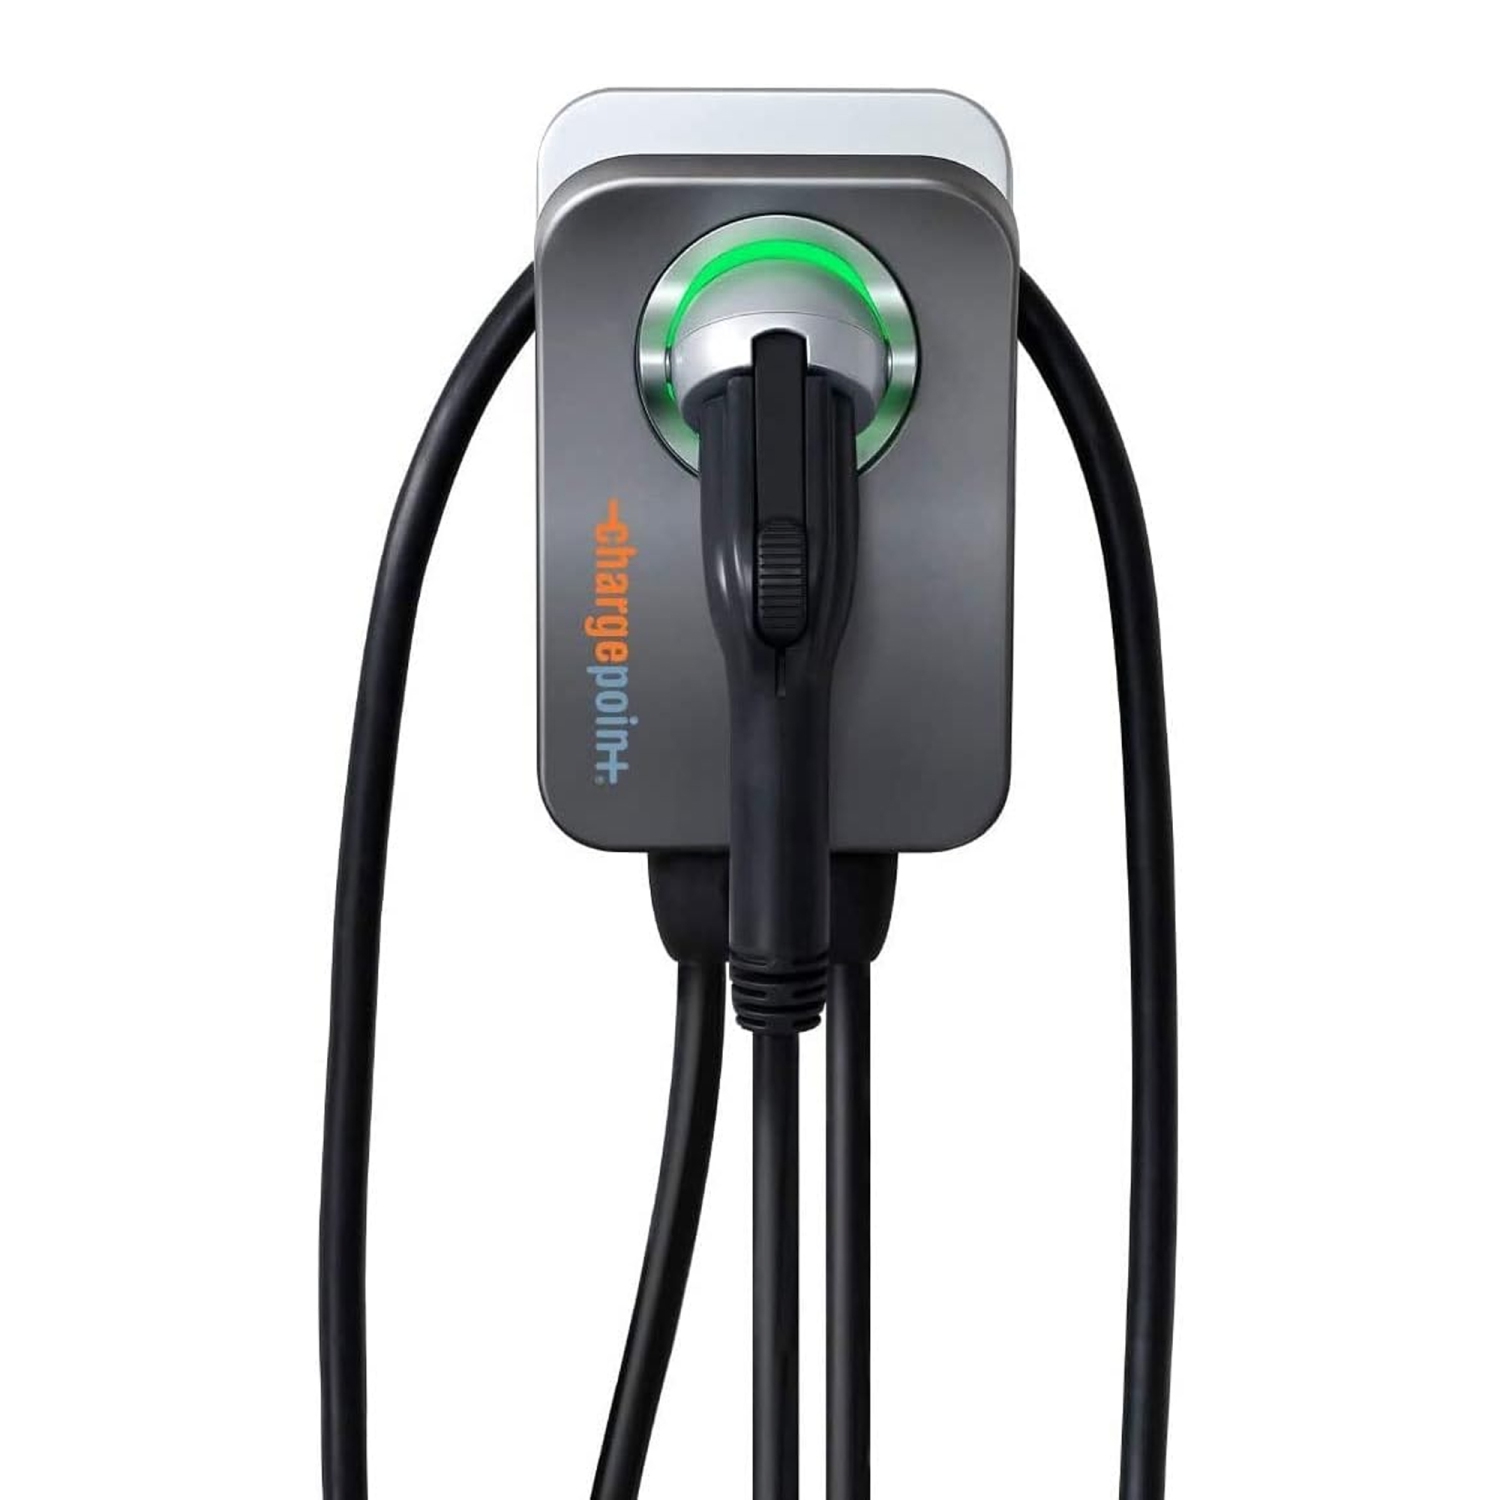 ChargePoint Home Flex Level 2 WiFi Enabled 240 Volt NEMA 14-50 Plug Electric Vehicle EV Charger for Plug in or Hardwired Indoor Outdoor Setup w/Cable